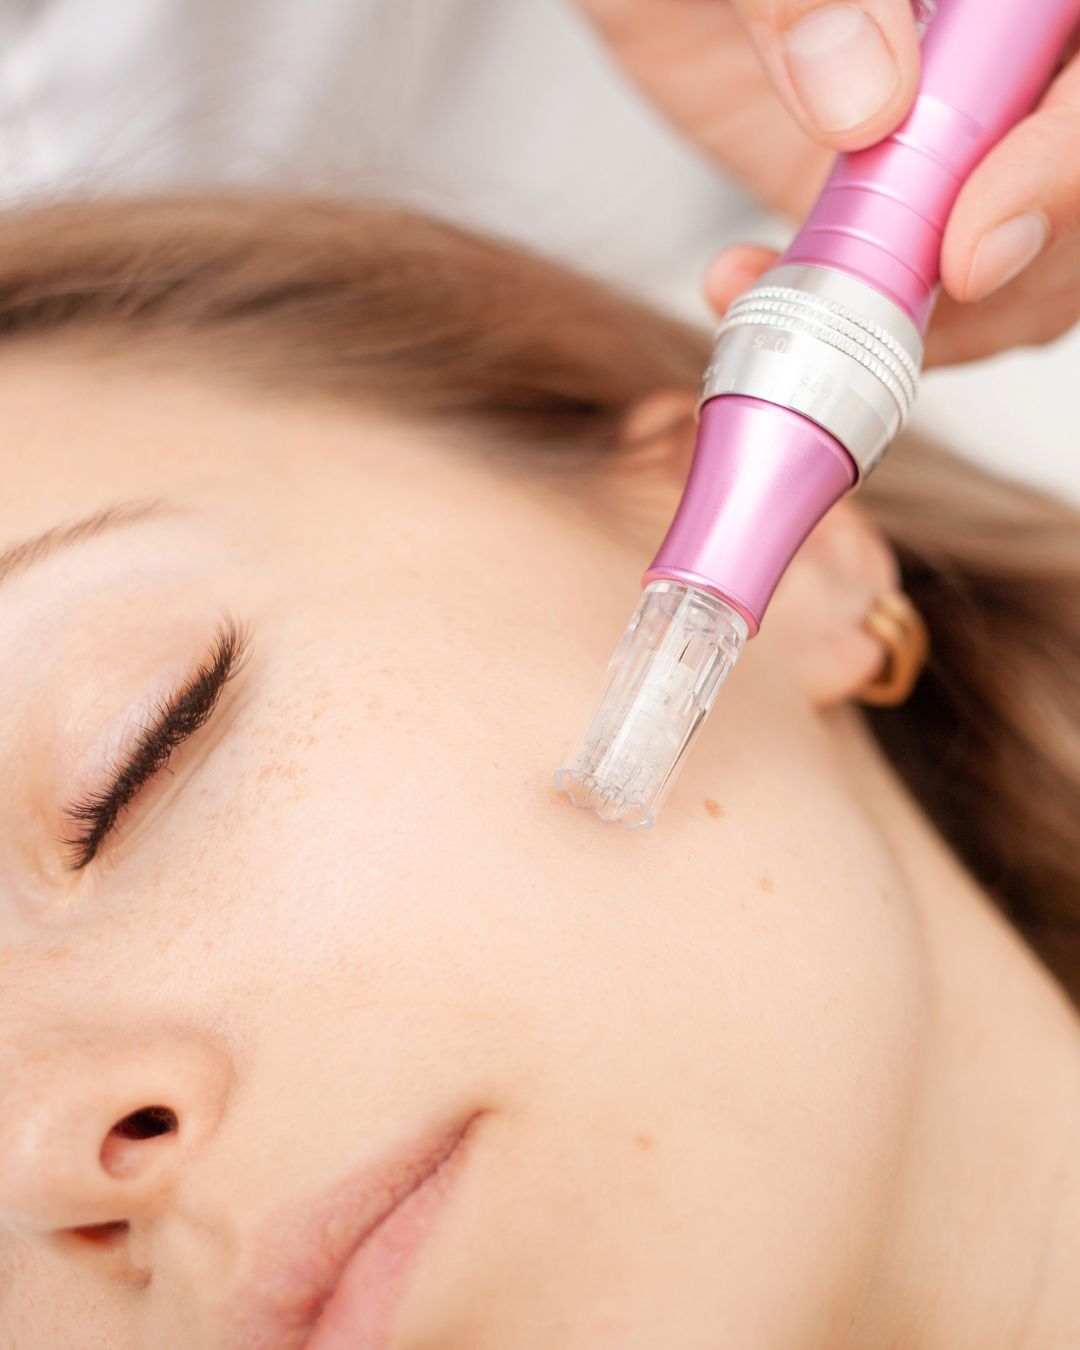 How do you take care of your skin after microneedling? 